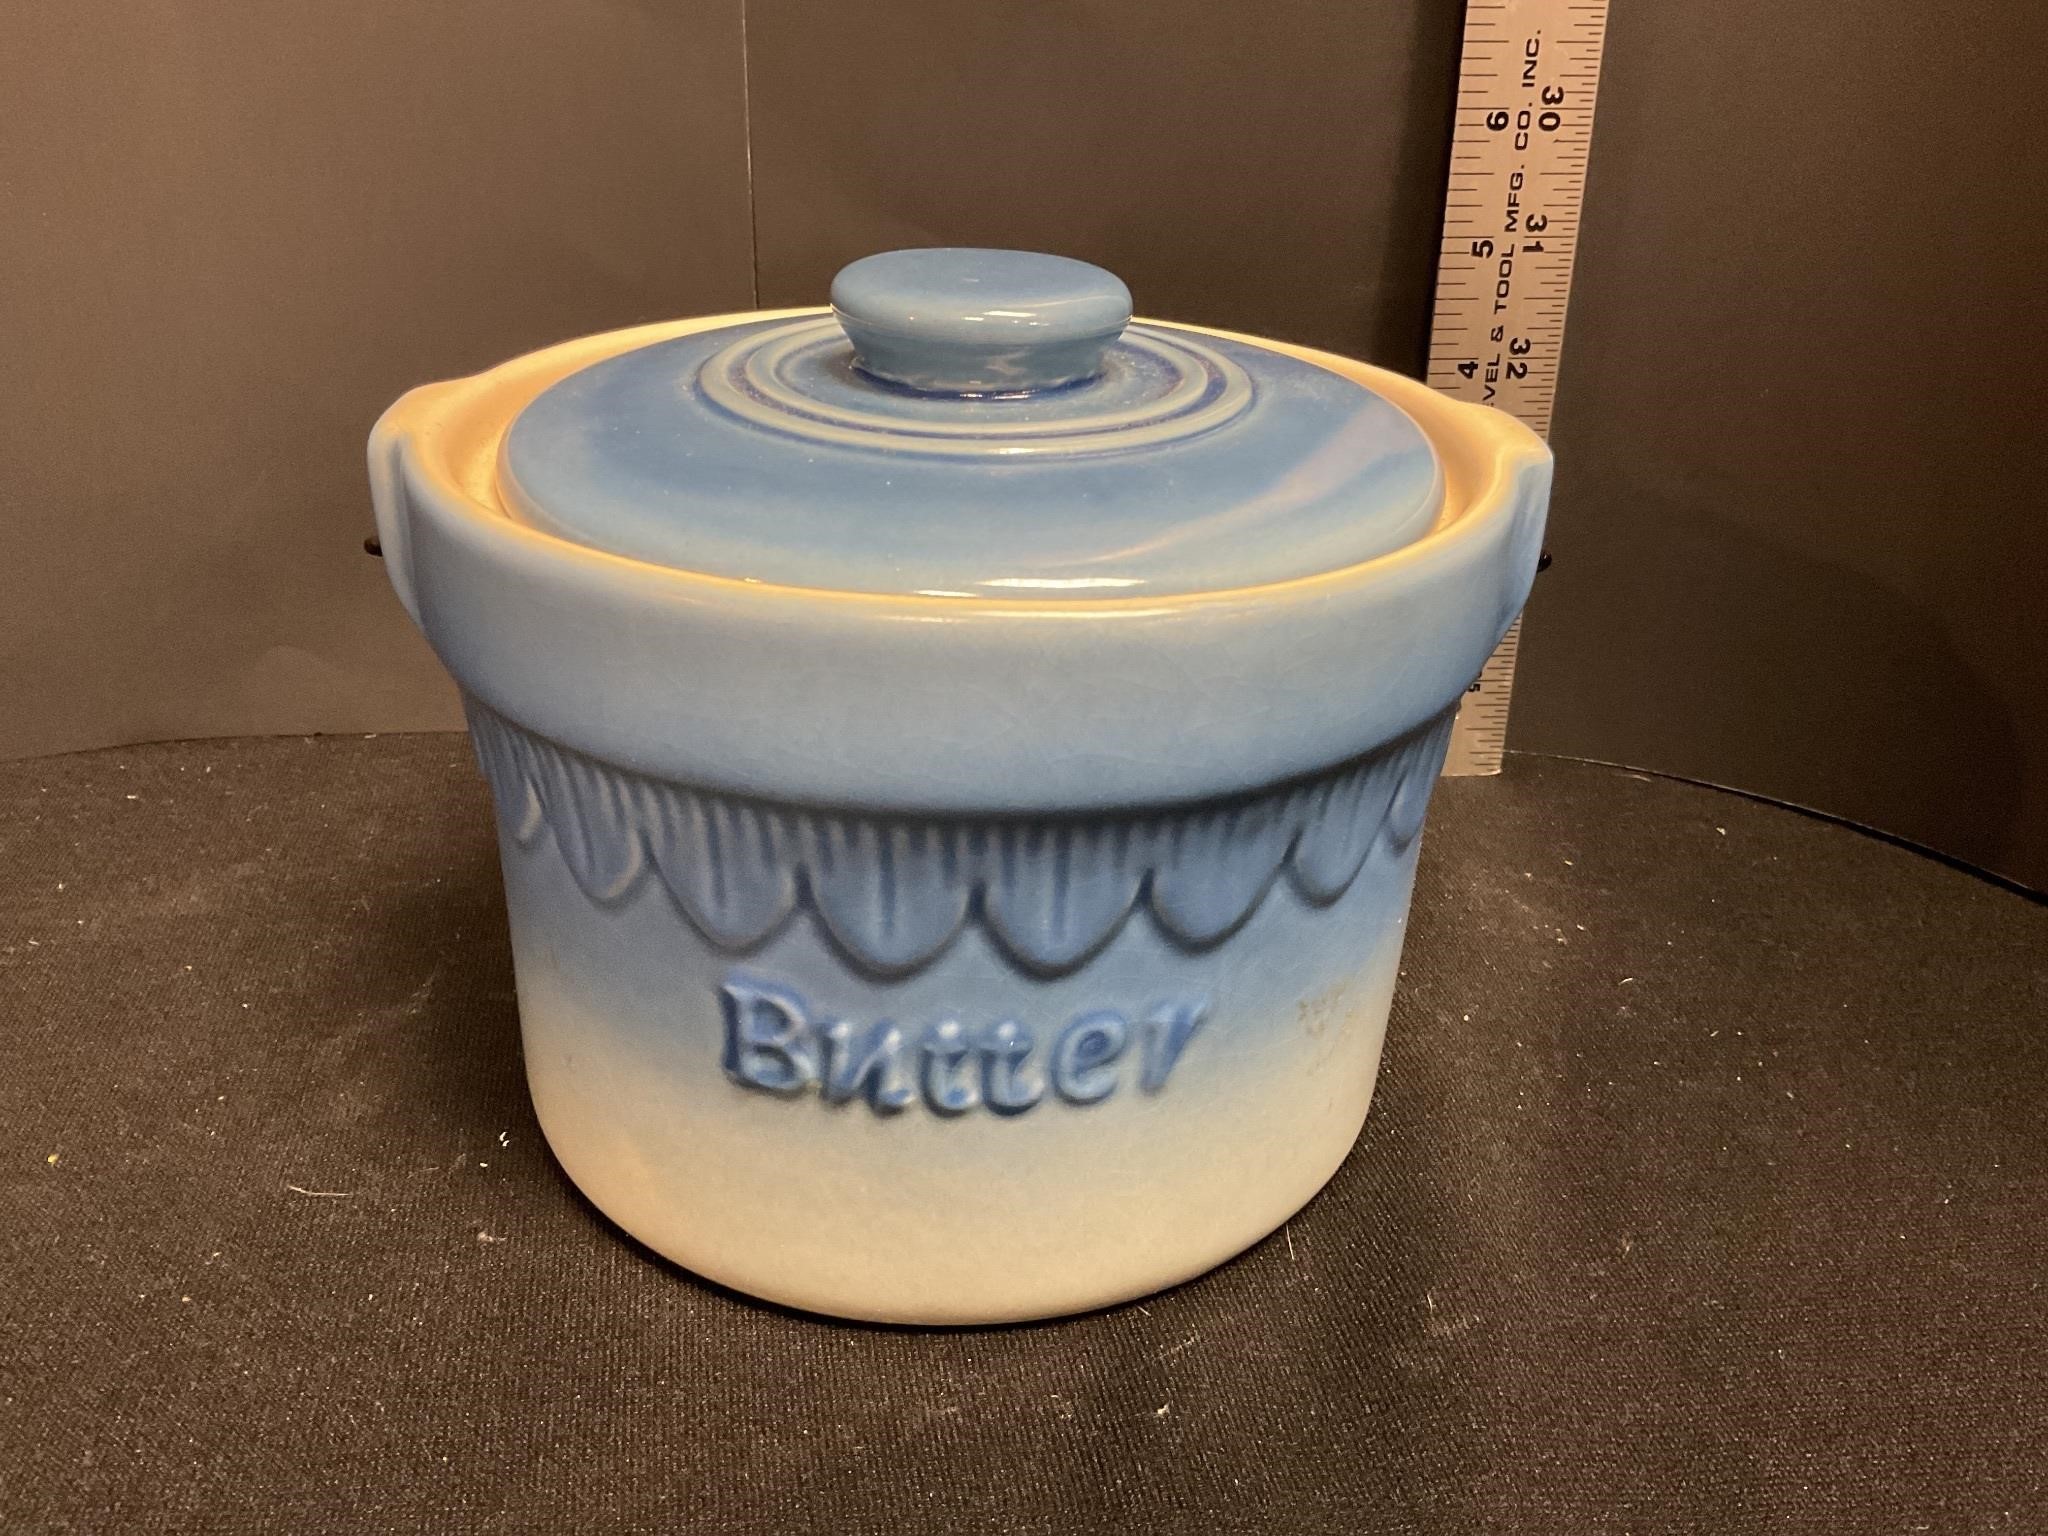 Pottery butter dish